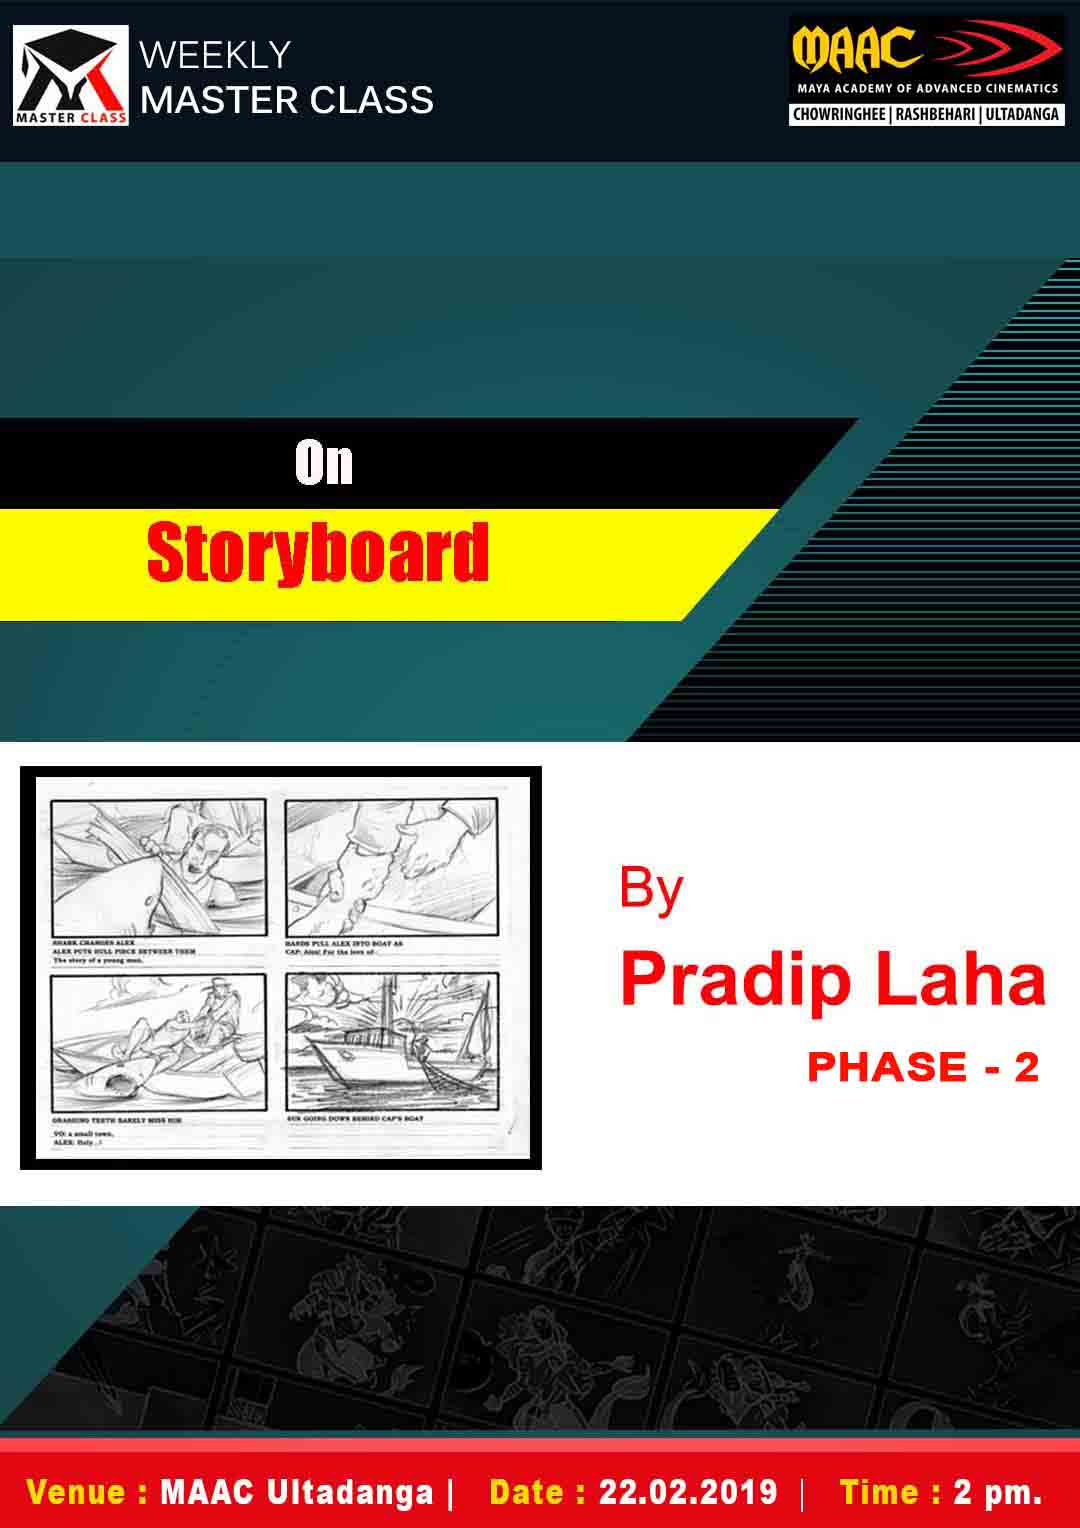 Weekly Master Class on Story Boarding Phase 2